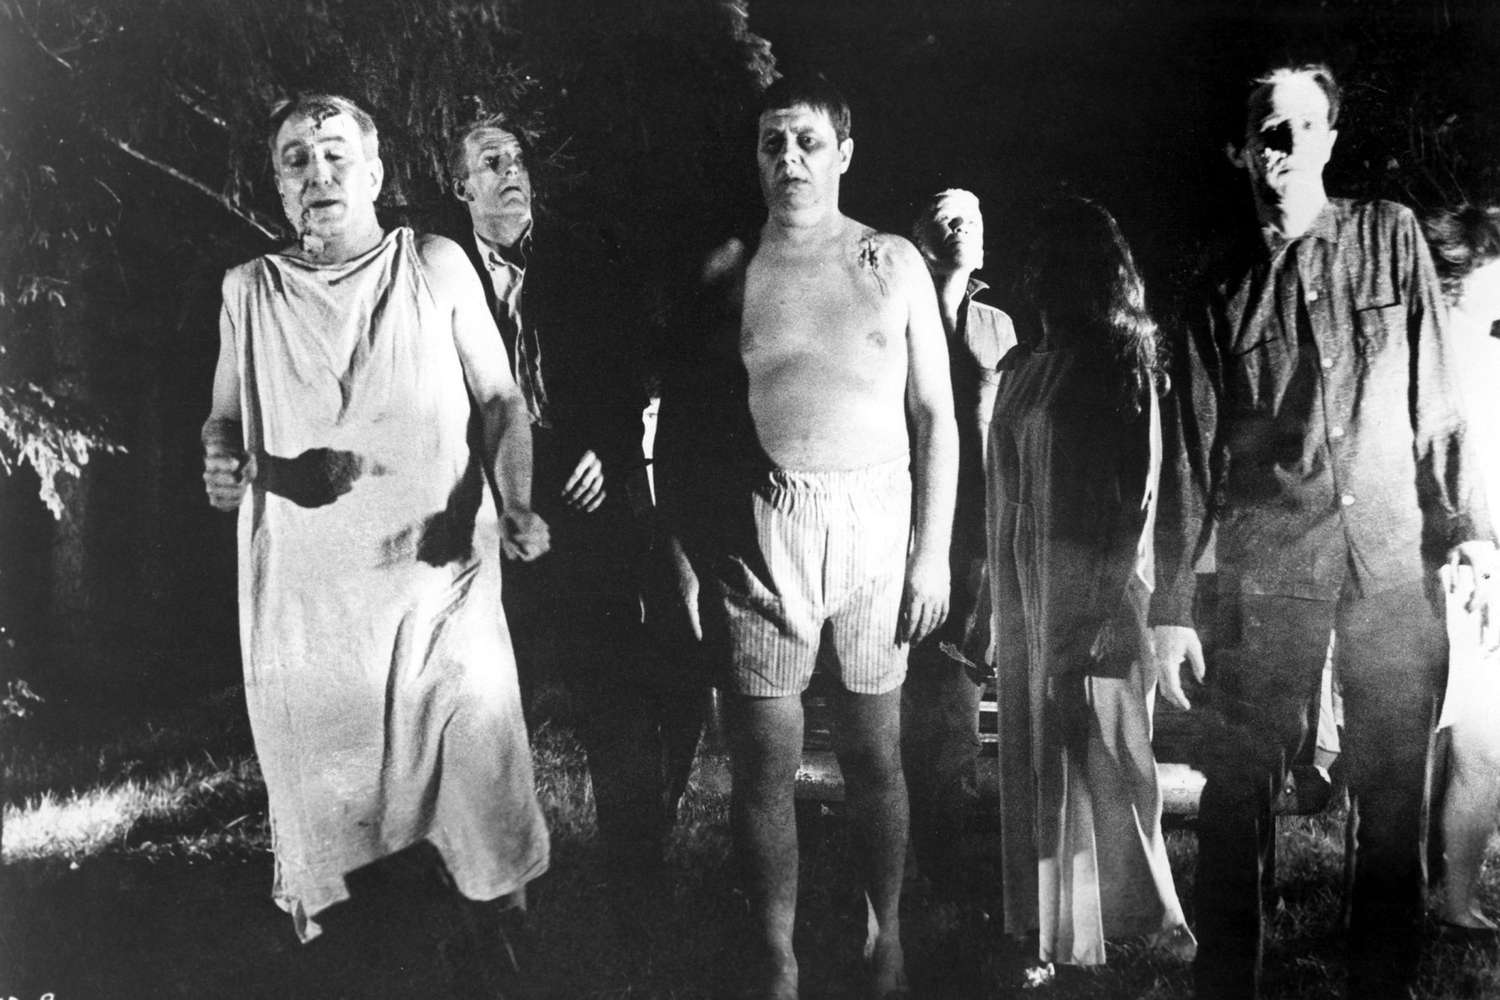 NIGHT OF THE LIVING DEAD, 1968